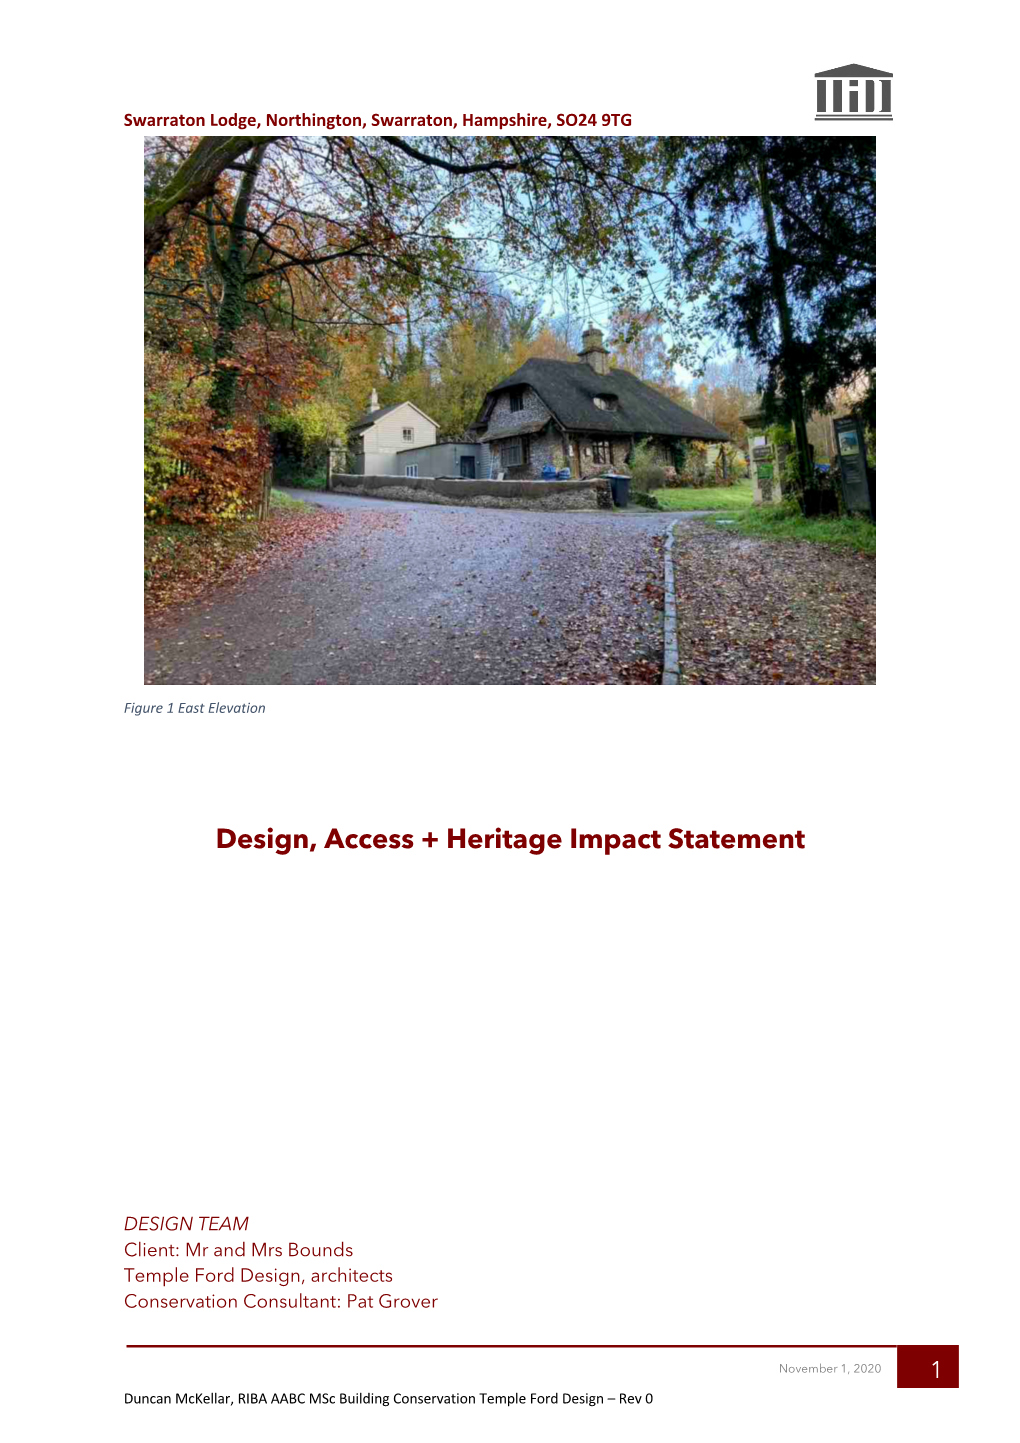 1935 Design Access and Heritage Impact Statement